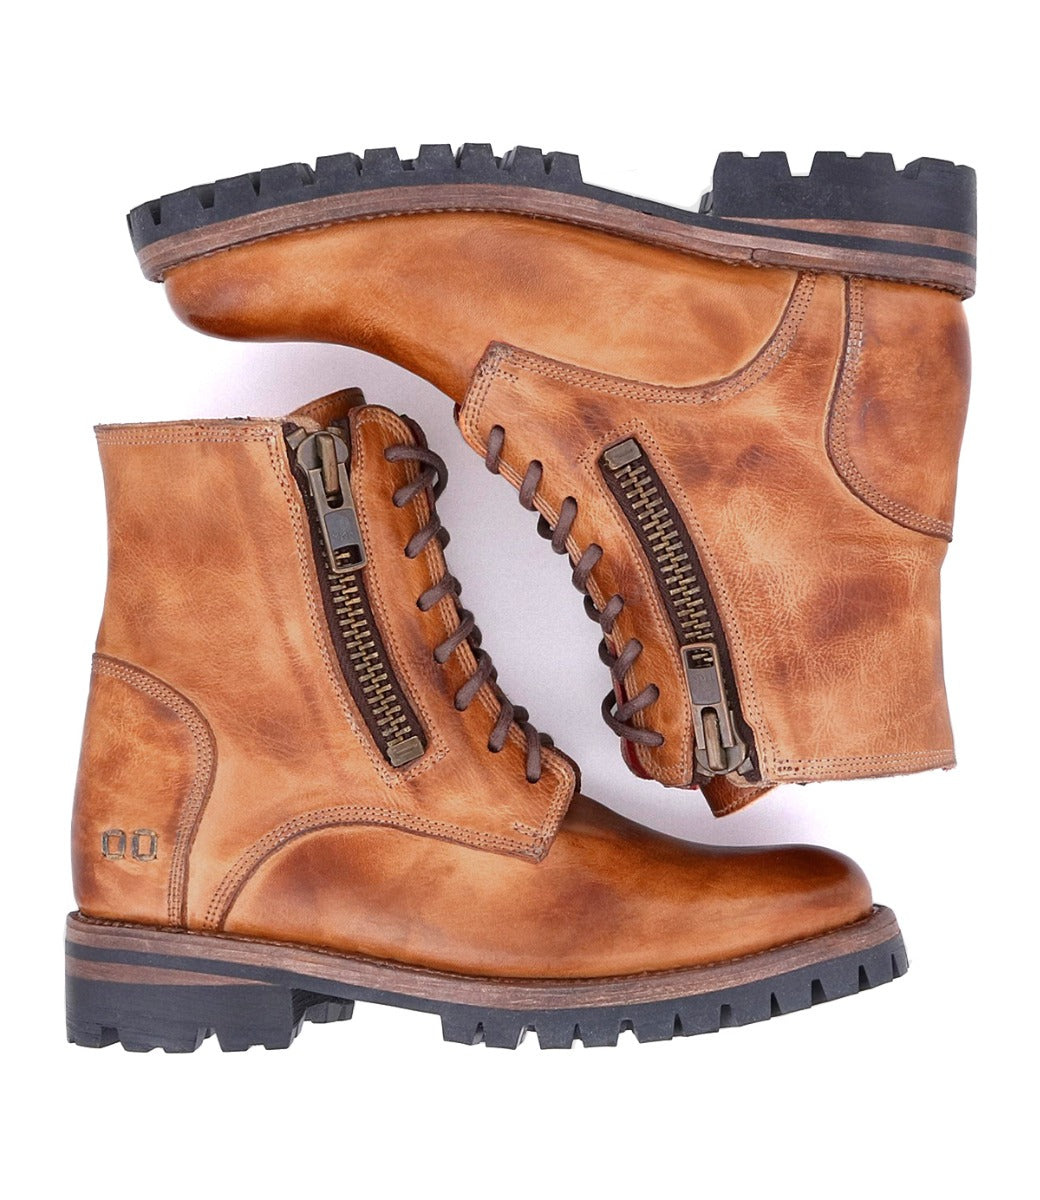 A pair of Tactic Trek brown leather boots with zippers by Bed Stu.